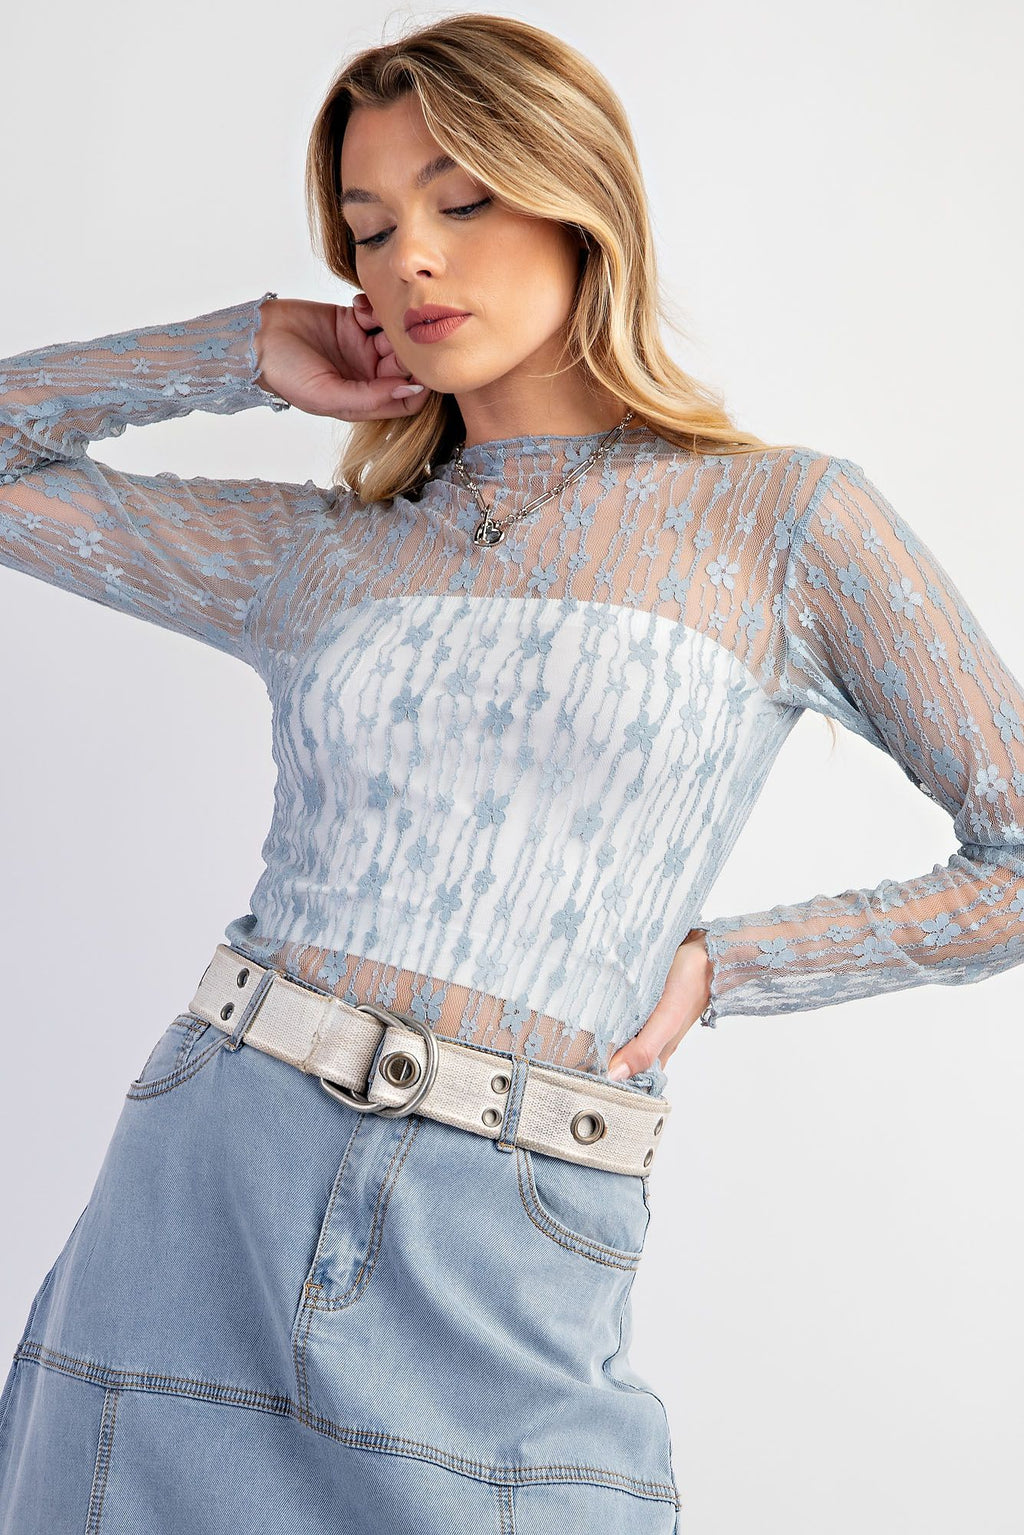 Stolen Glances Dusty Blue All Over Sheer Lace Top